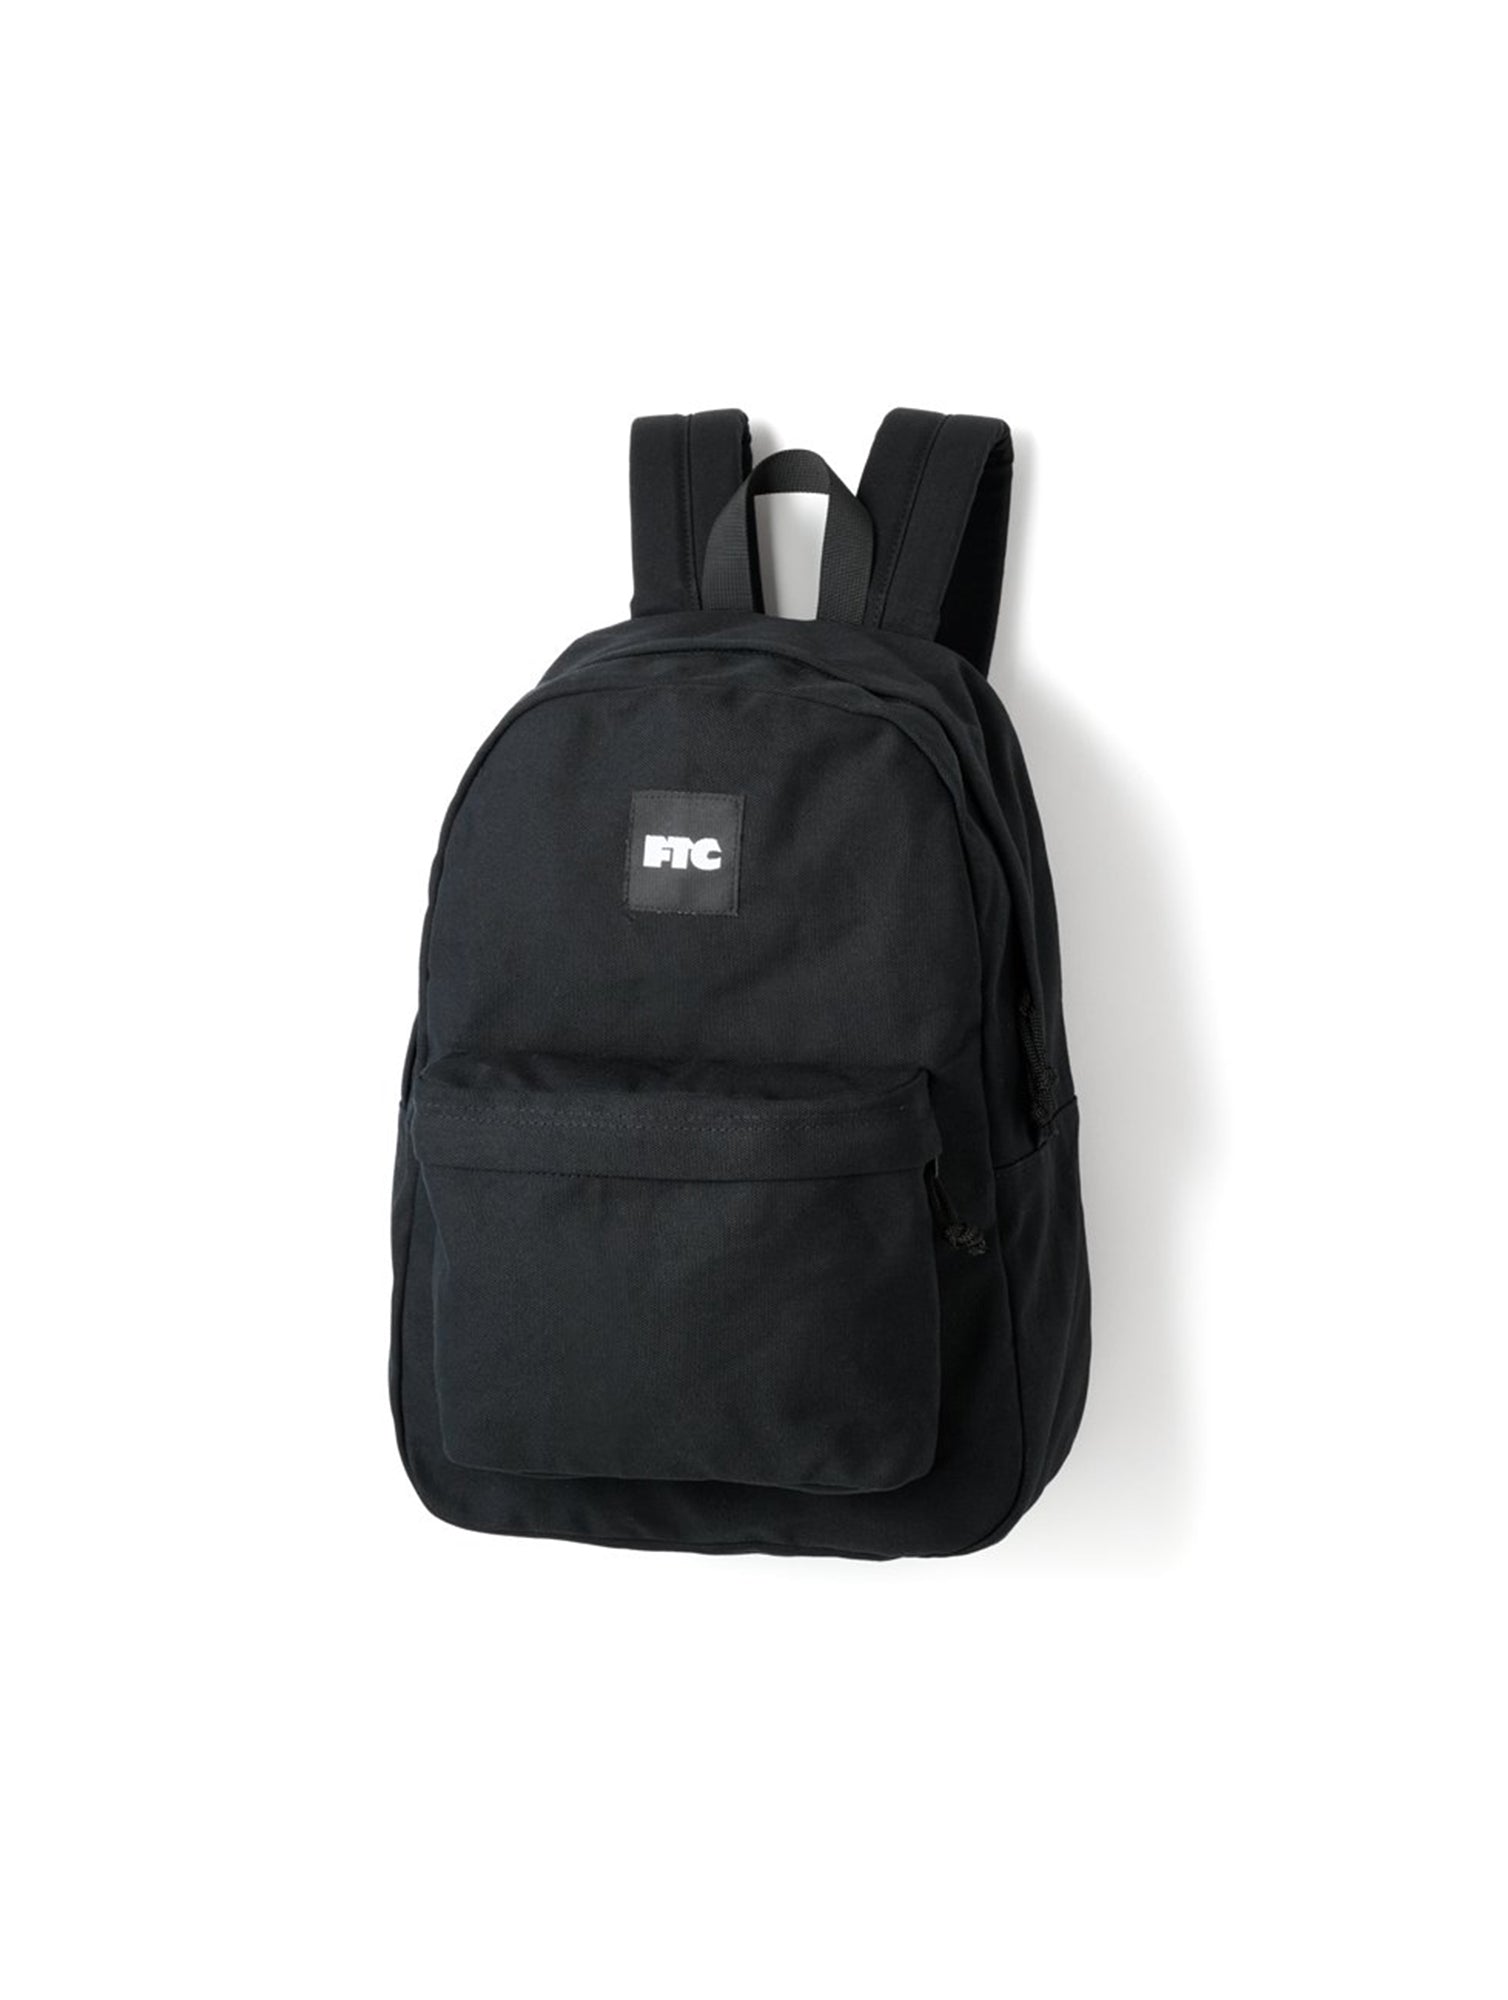 FTC CANVAS BACKPACK – FTC SKATEBOARDING